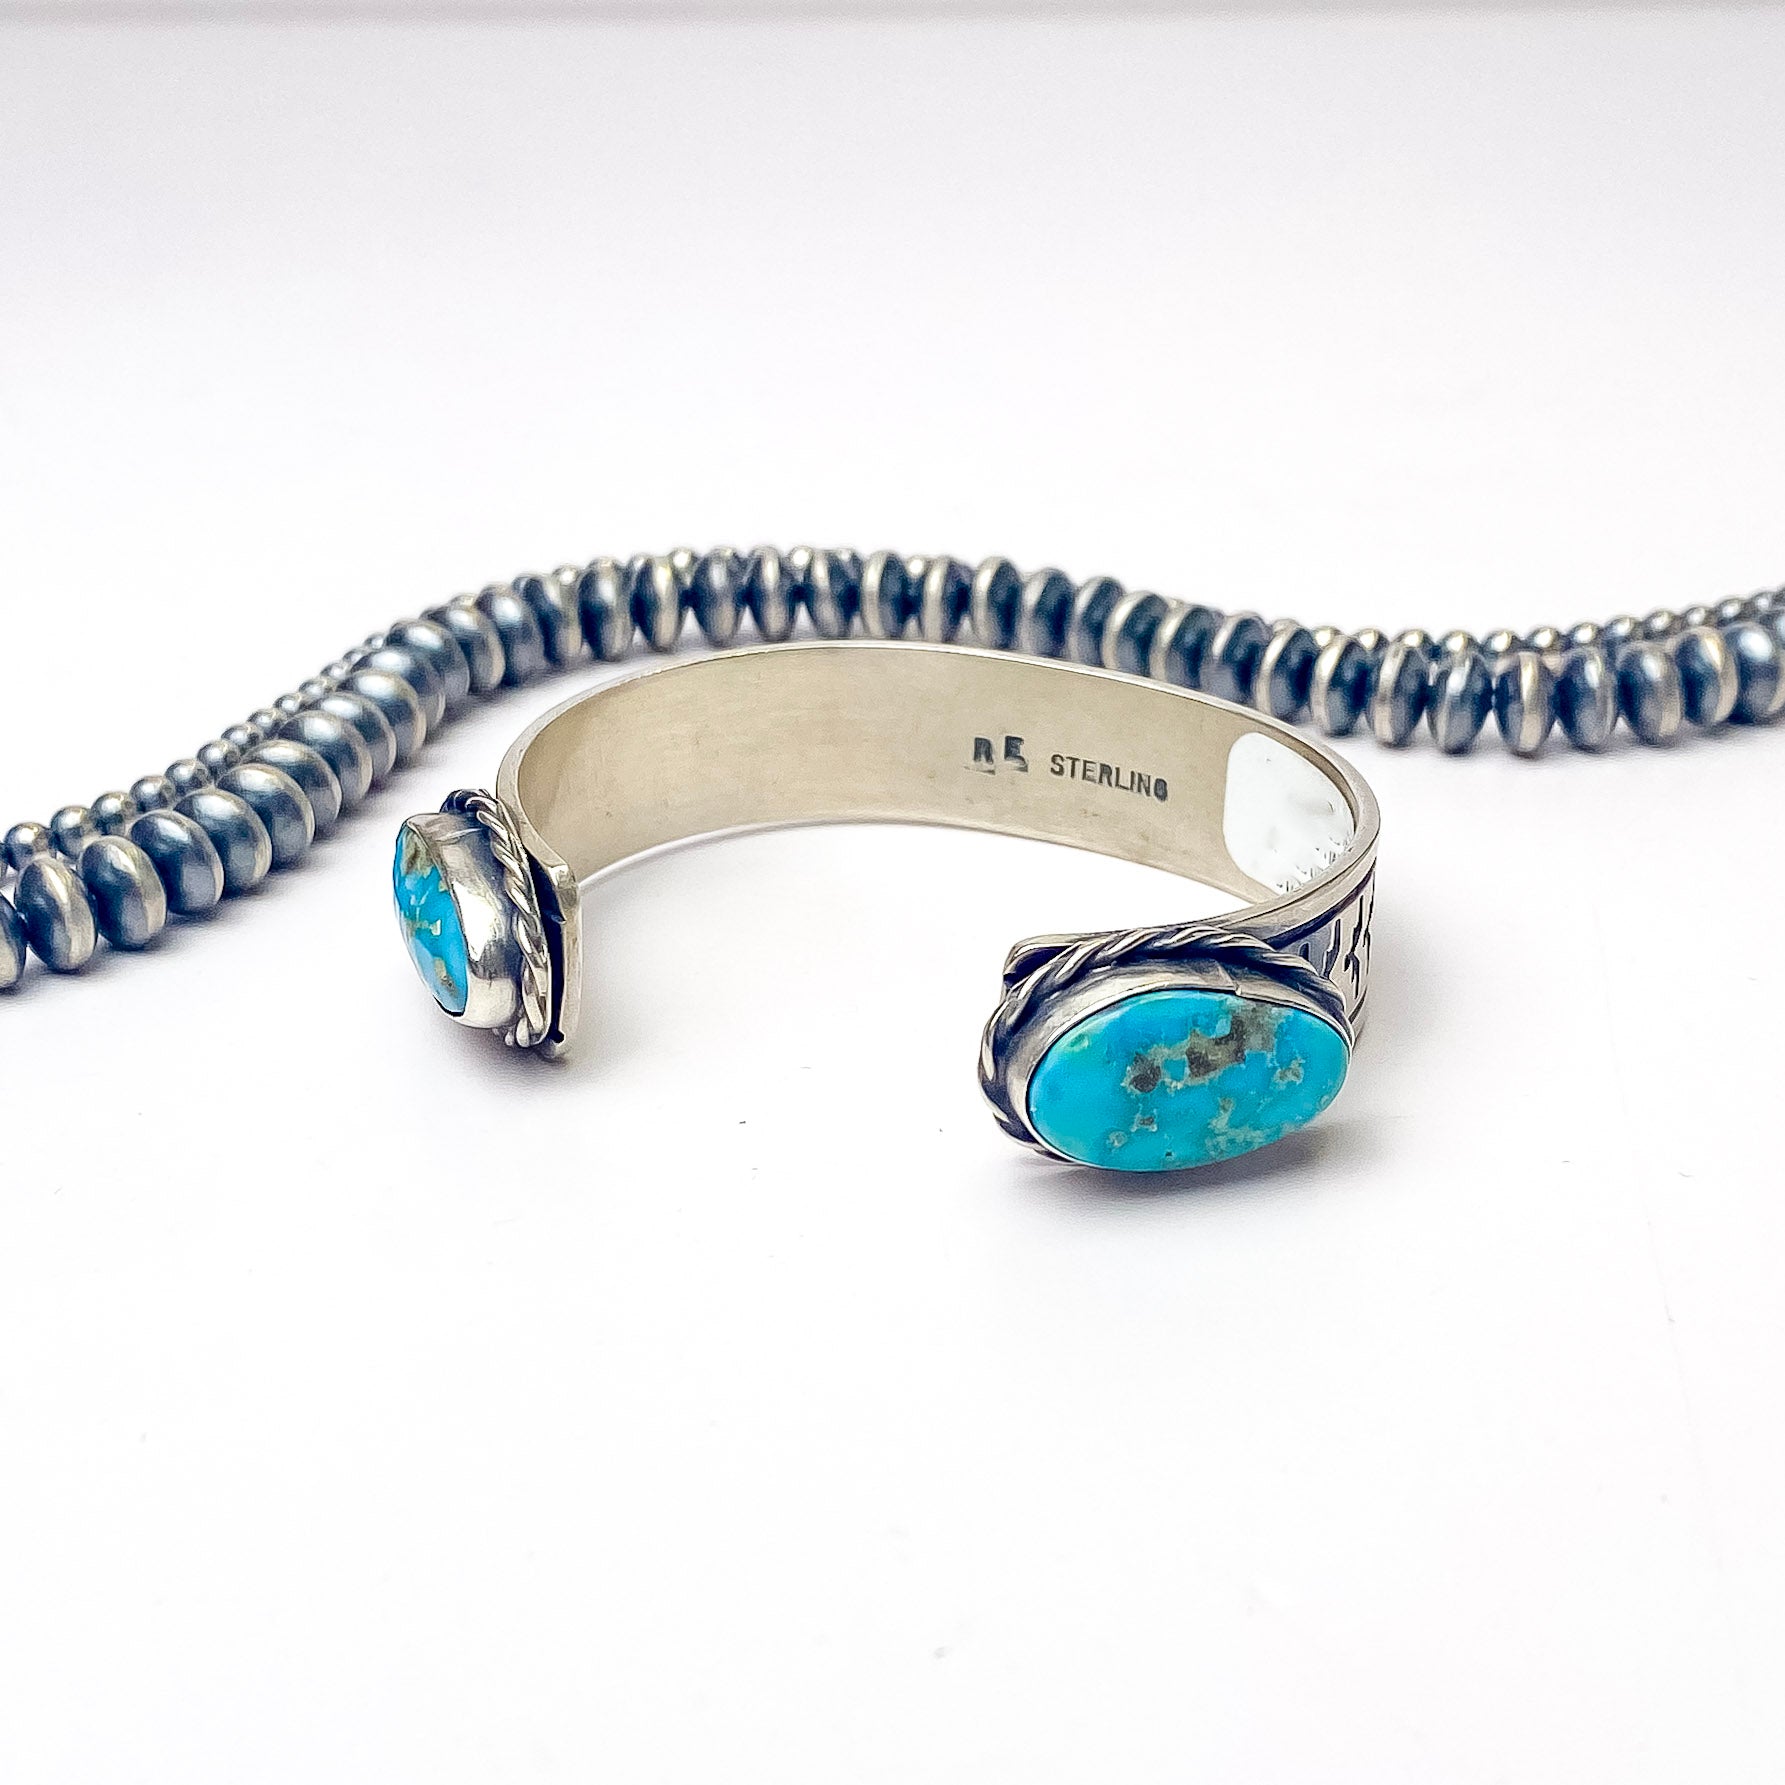 Rick Enriquez | Navajo Handmade Detailed Sterling Silver Open Cuff Bracelet with Blue Ridge Turquoise Stones - Giddy Up Glamour Boutique